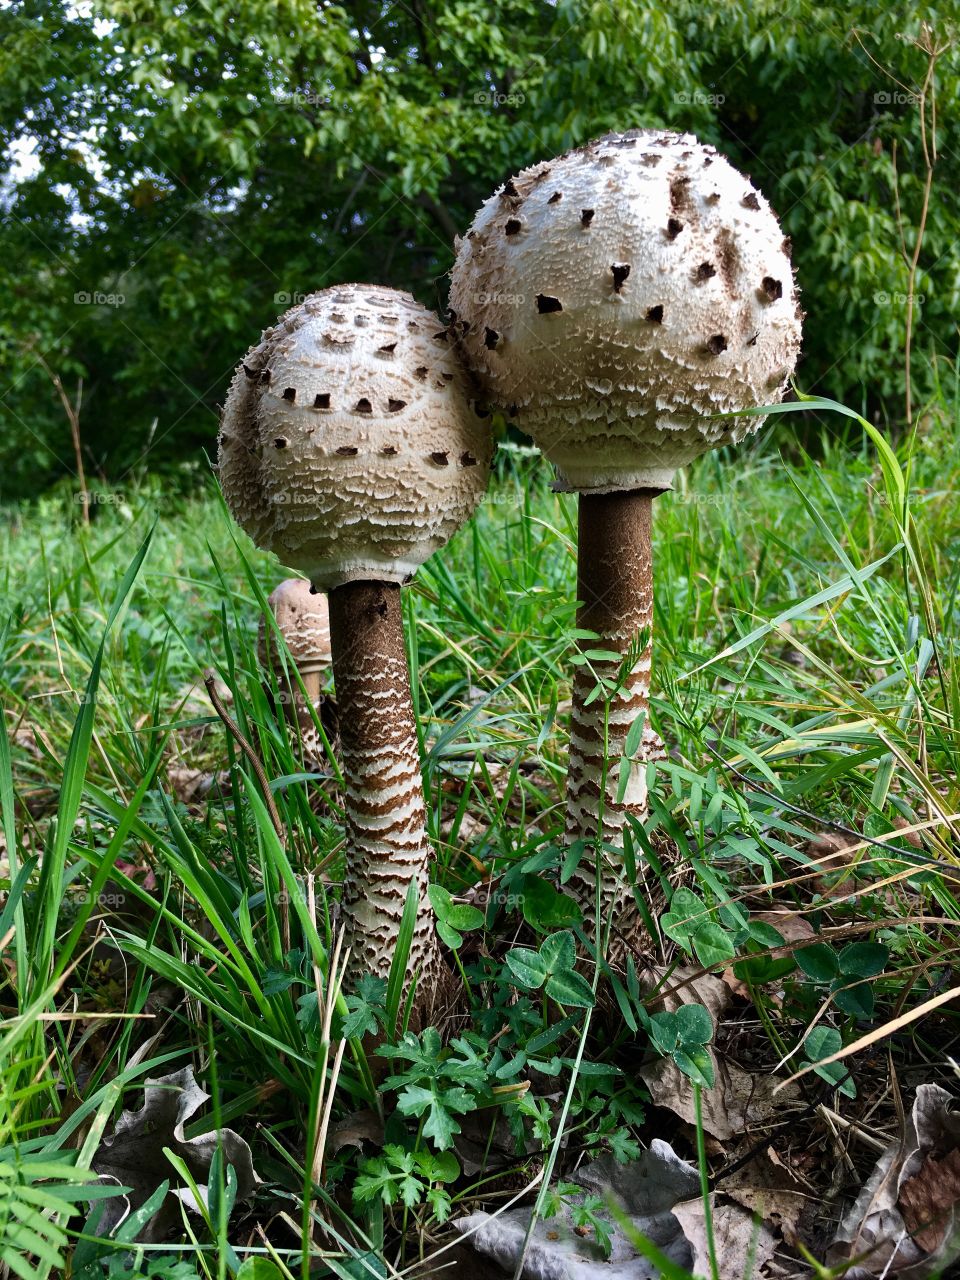 a fine example of a two young parasol mushrooms in a woody background environment